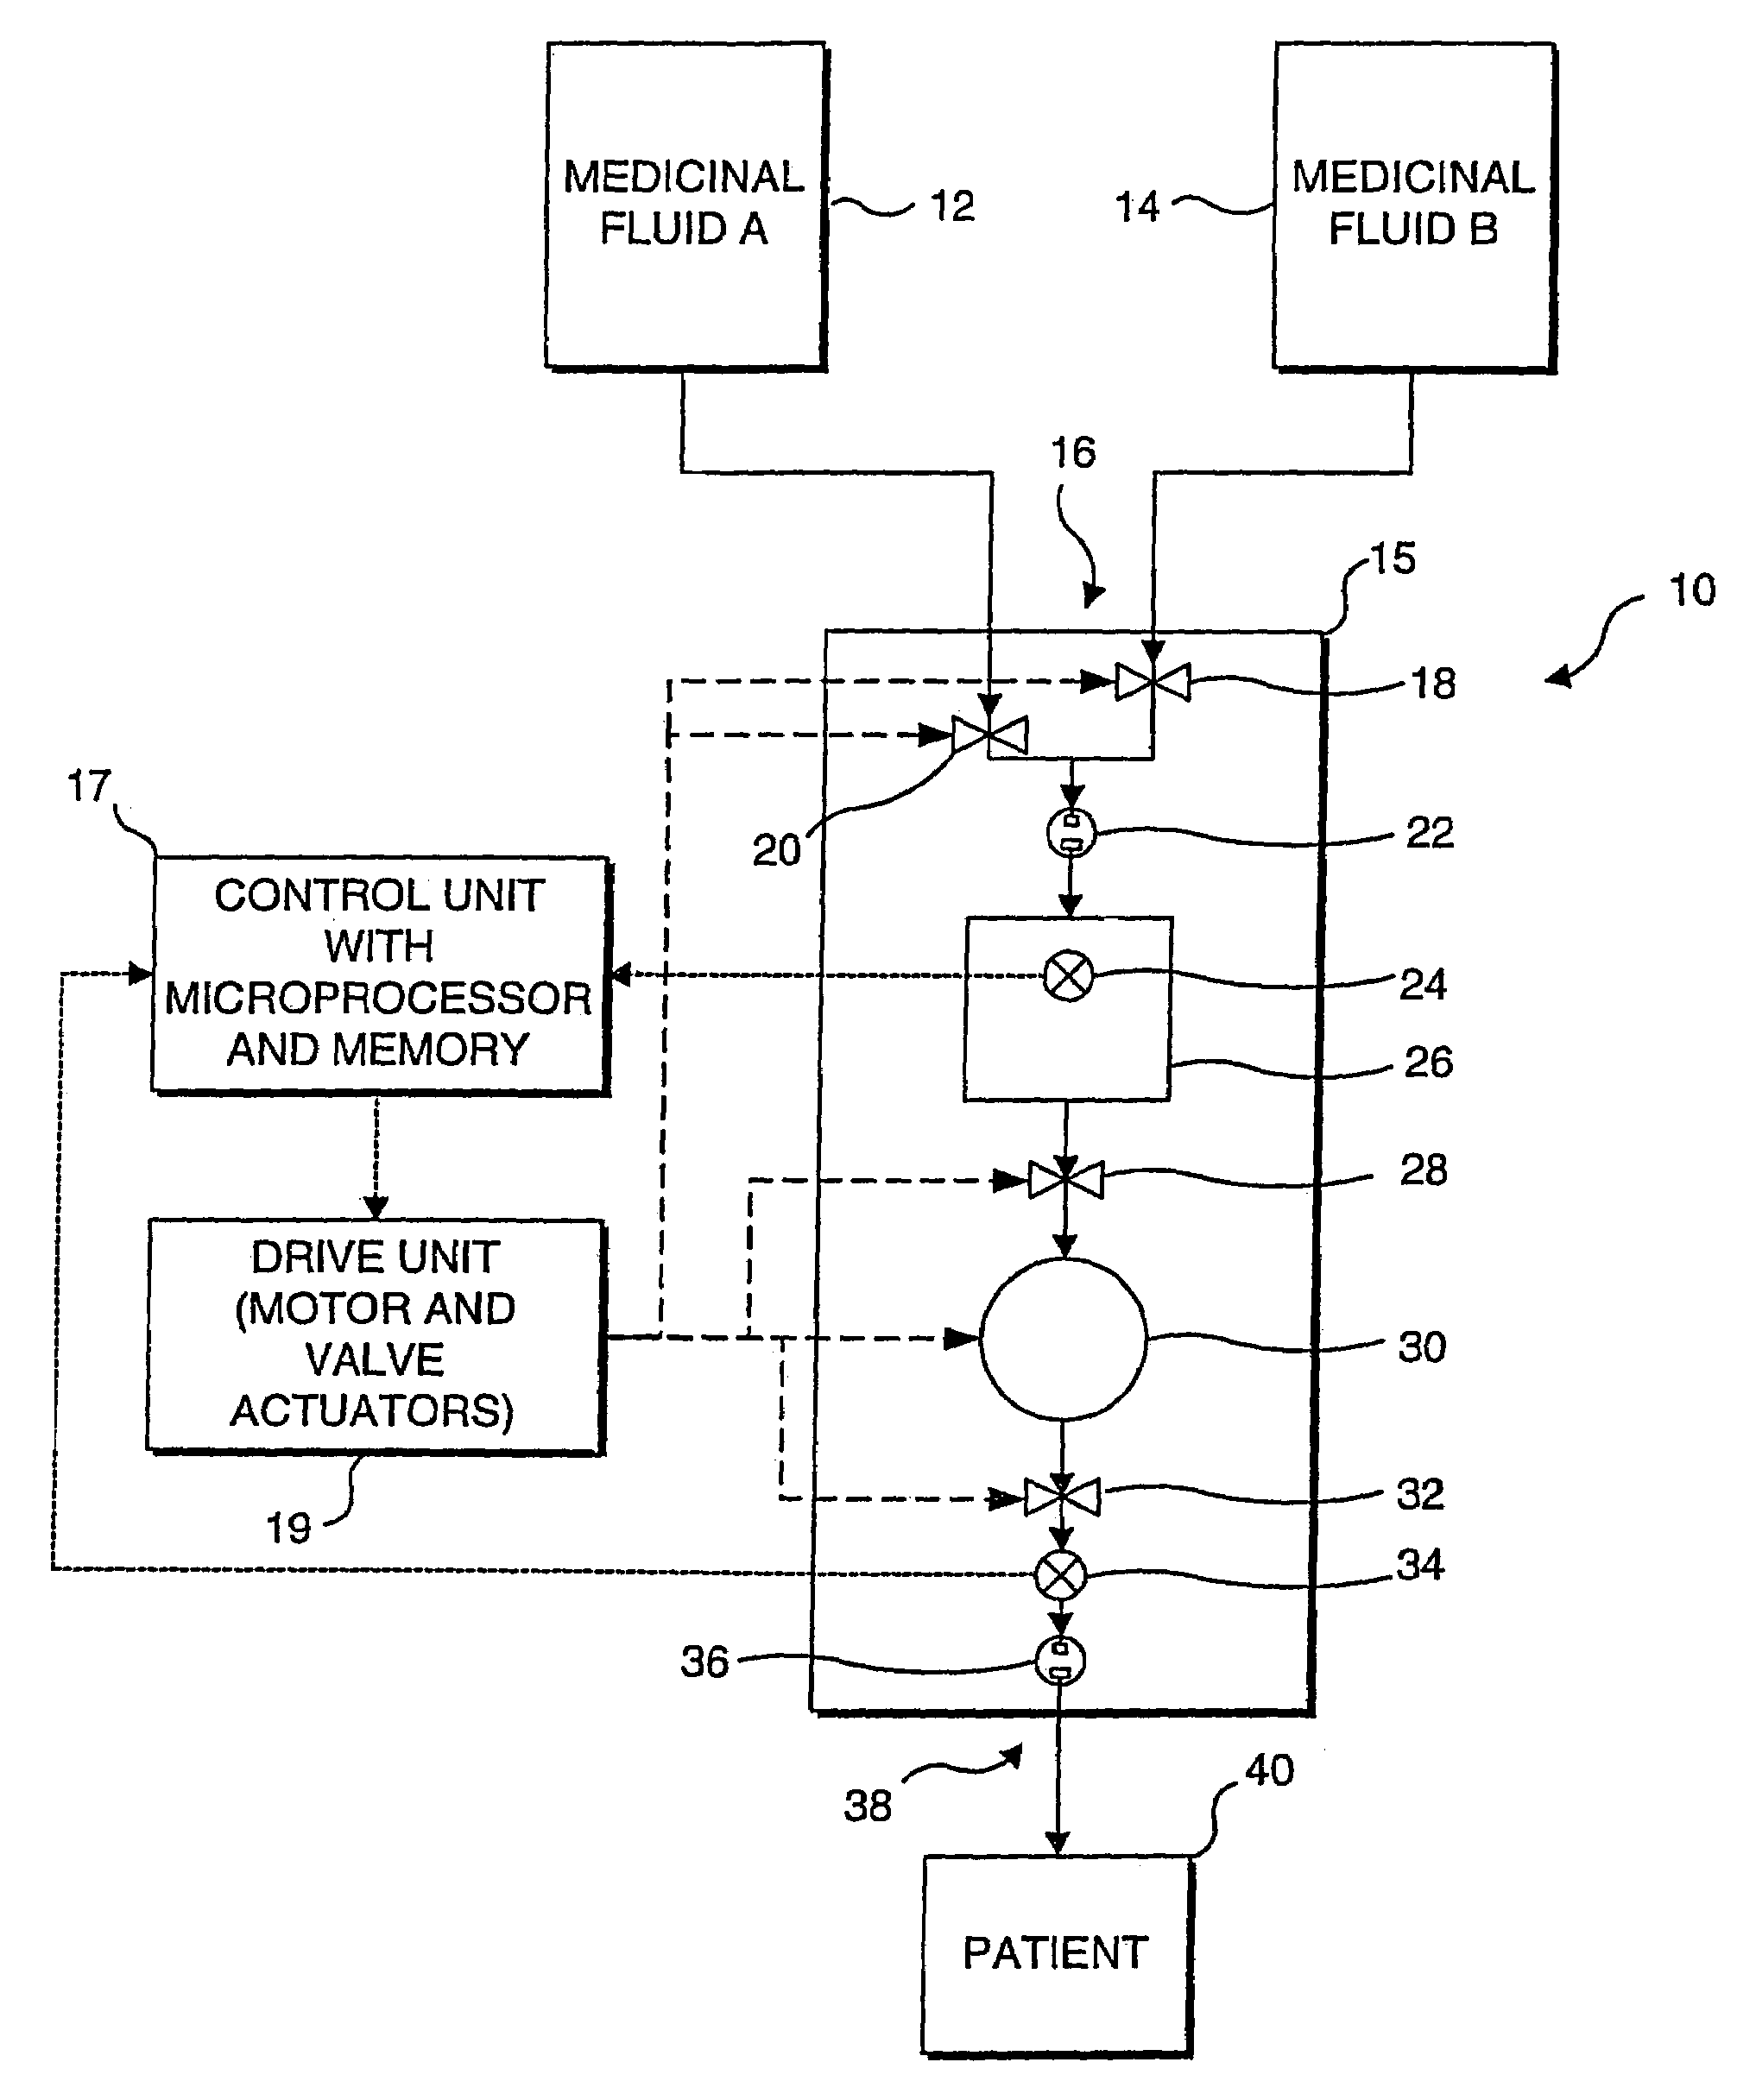 Method for compensating for pressure differences across valves in cassette type IV pump